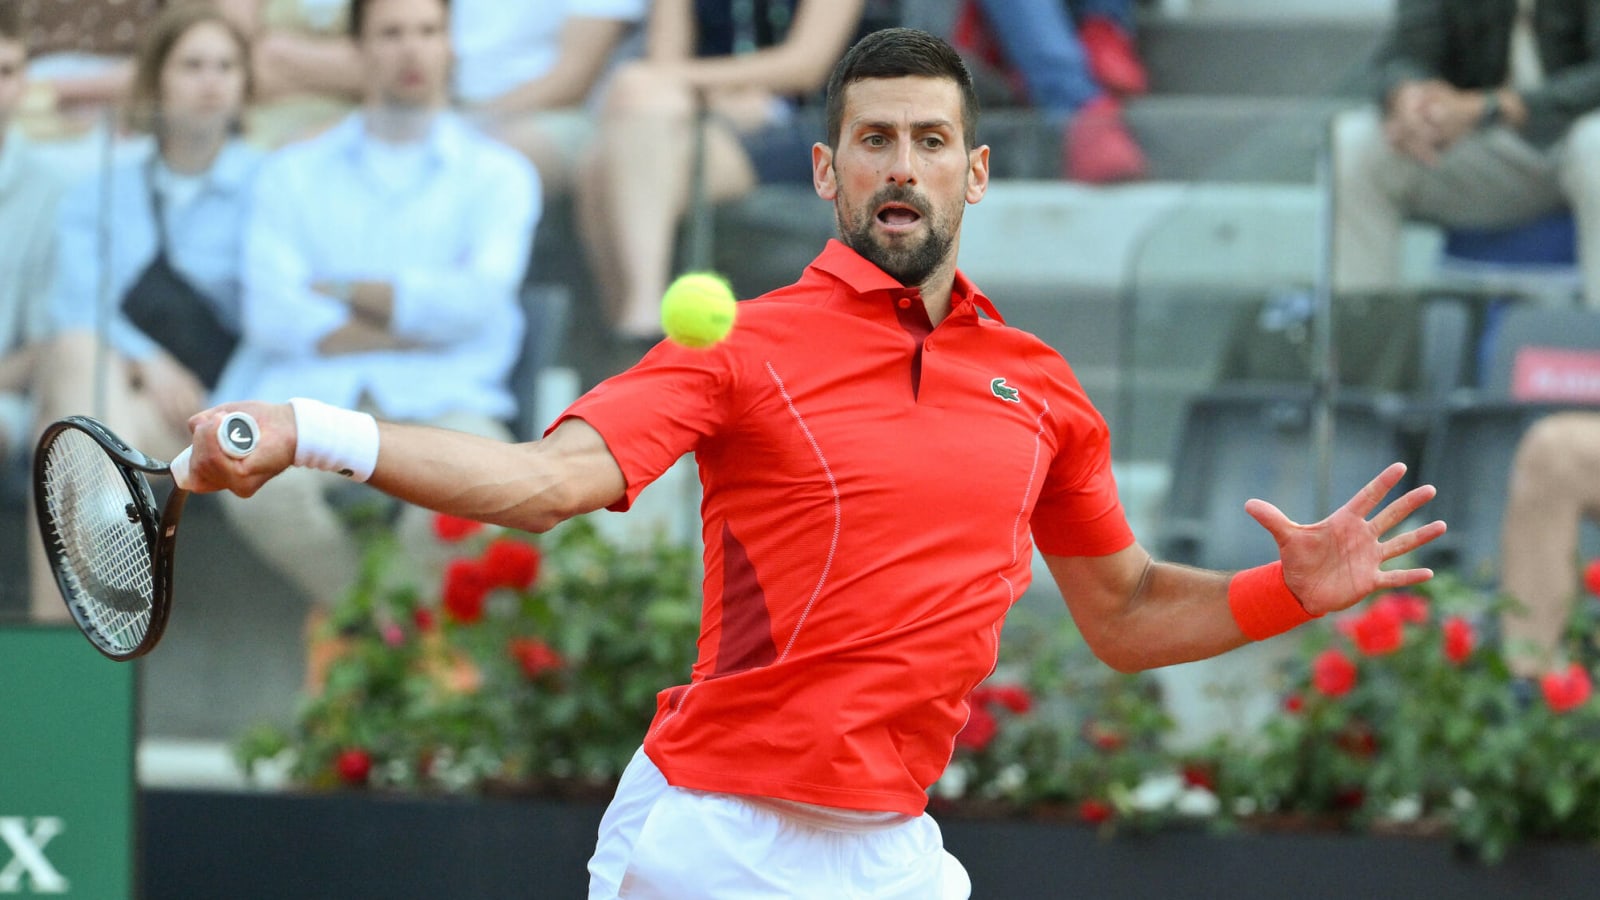 Watch: Novak Djokovic comes back to the Italian Open wearing a ‘helmet’ after getting hit in the head accidentally last night